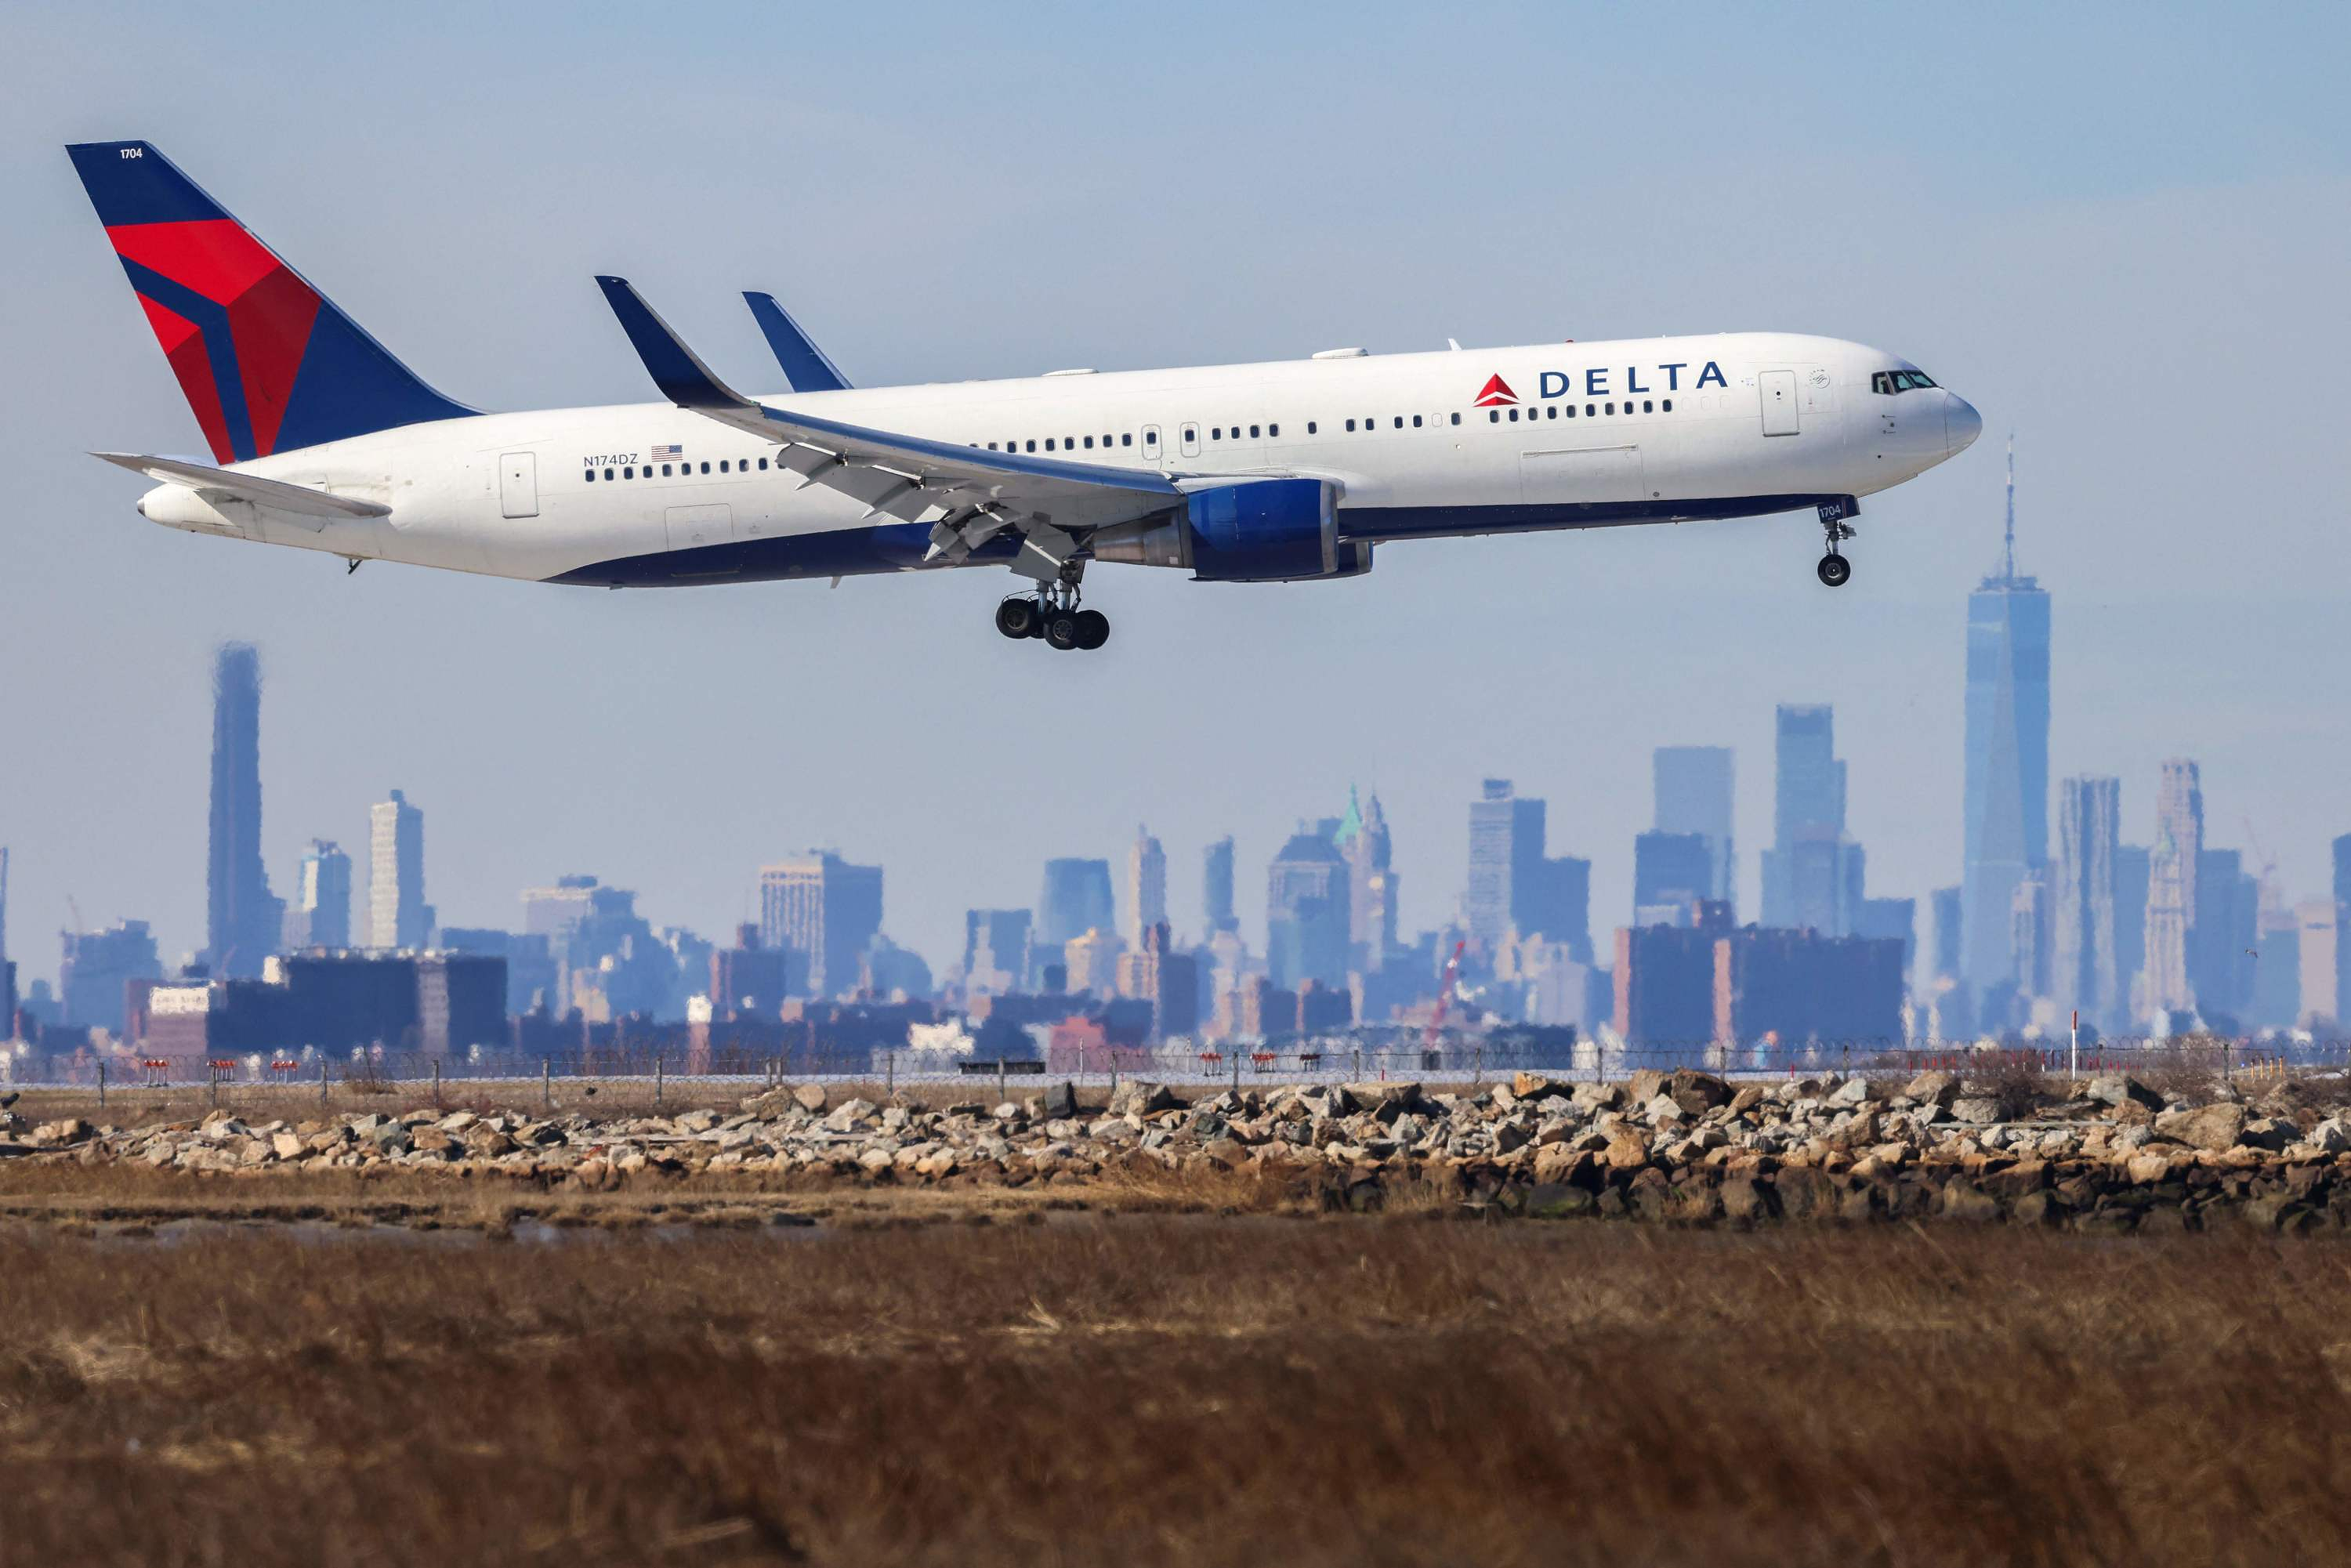 In the United States, a Boeing 767 loses its emergency slide shortly after takeoff